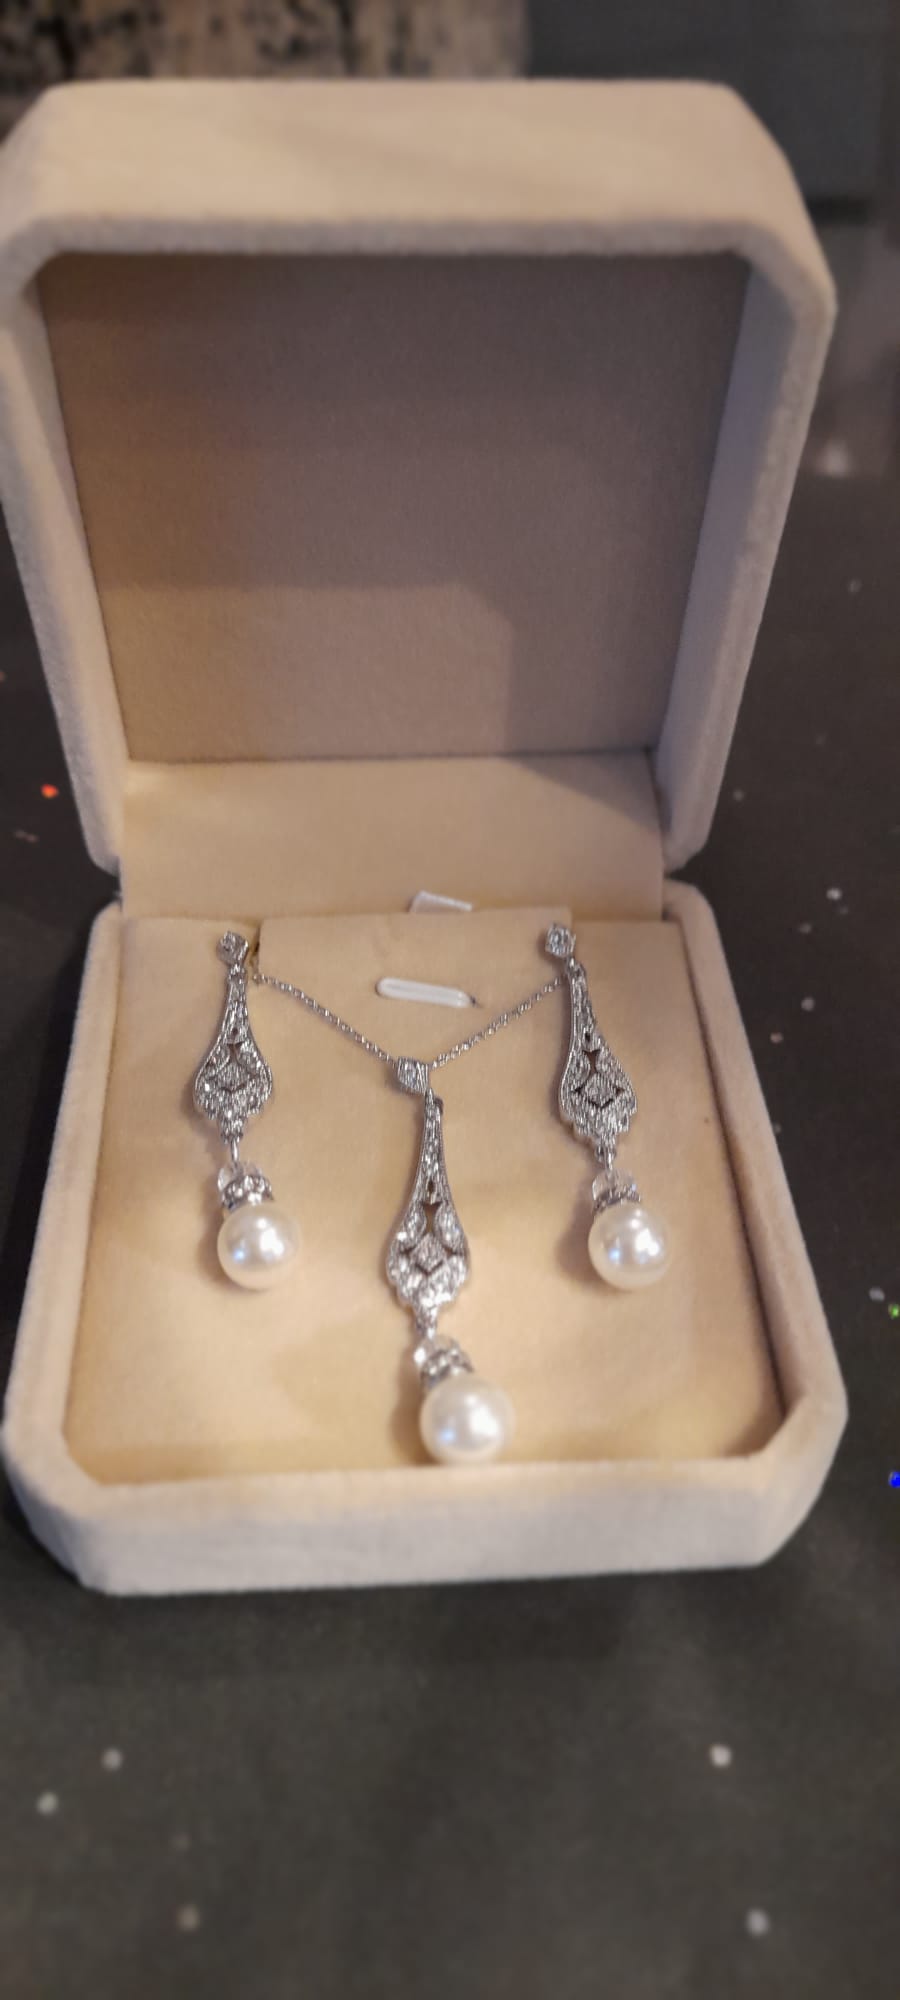 Drop earrings and pendant 18 inch chain silver and marcasite crystal